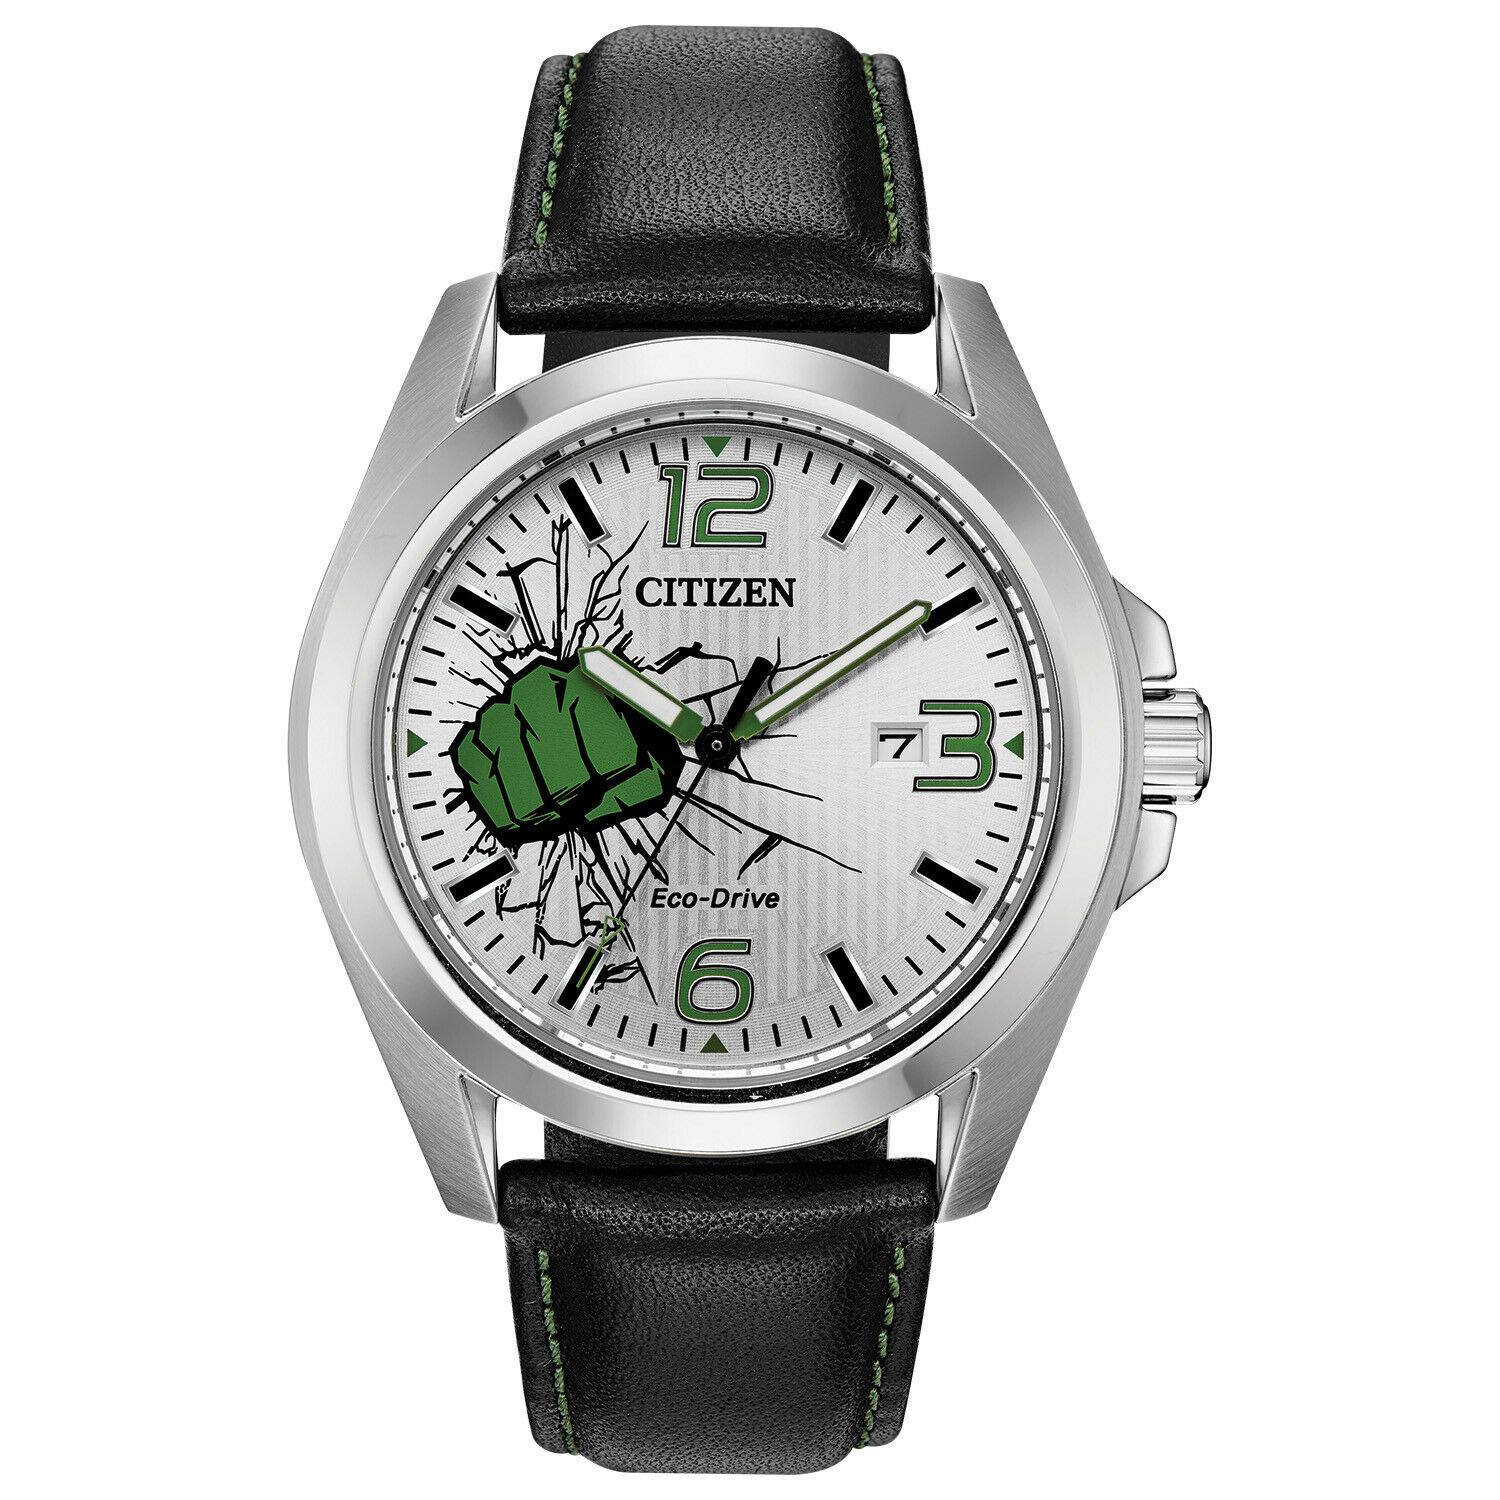 Citizen Eco-Drive Hulk Limited Edition 45mm  AW1431-24W  | Mfr Refurb from eBay and Free Shipping $50.69